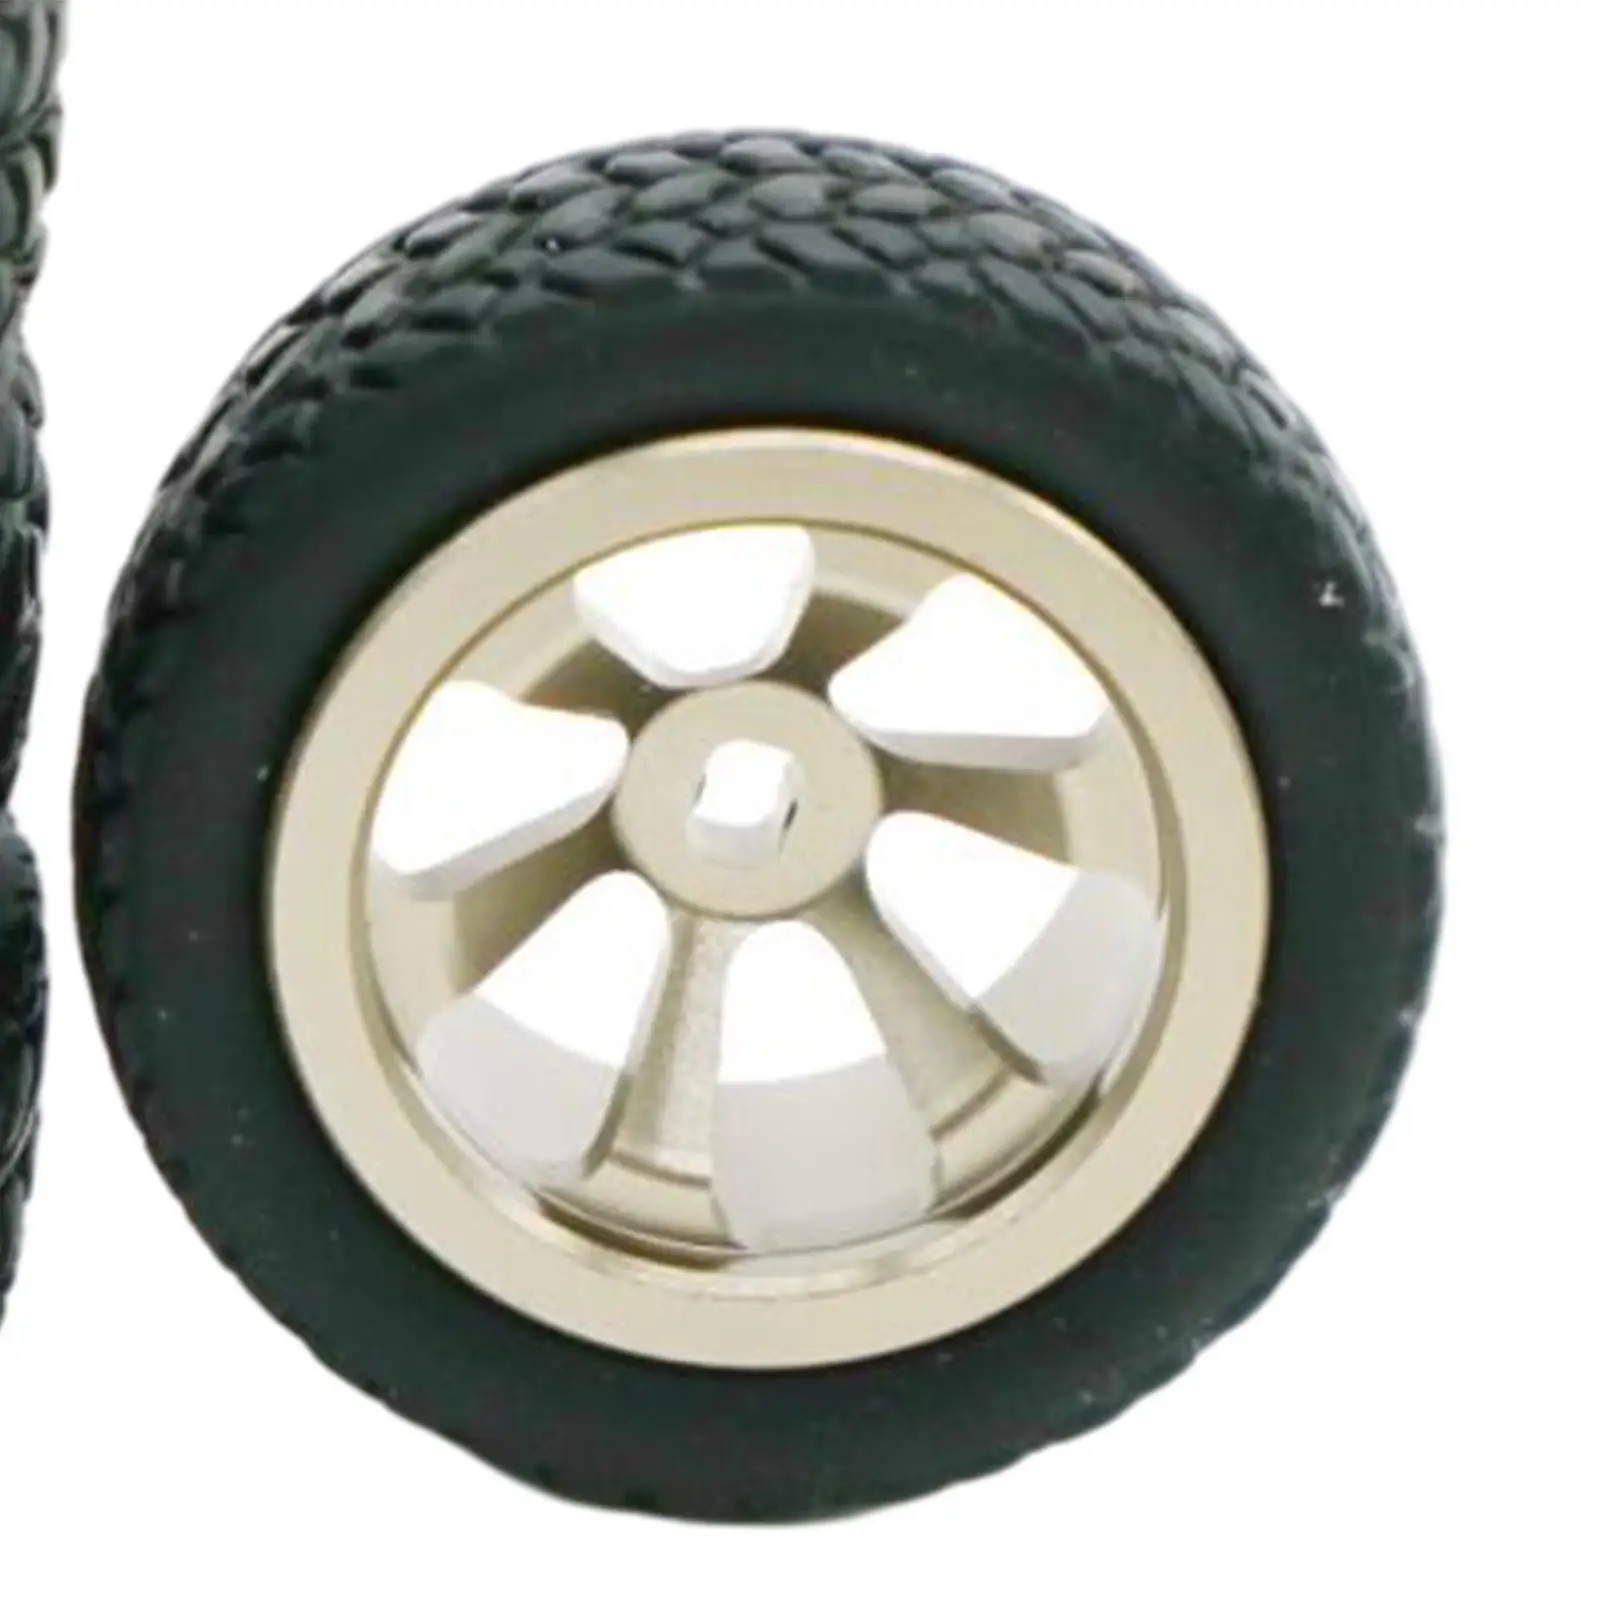 Pack of 2 with 4x Crawler&Wheel Tires 1.18